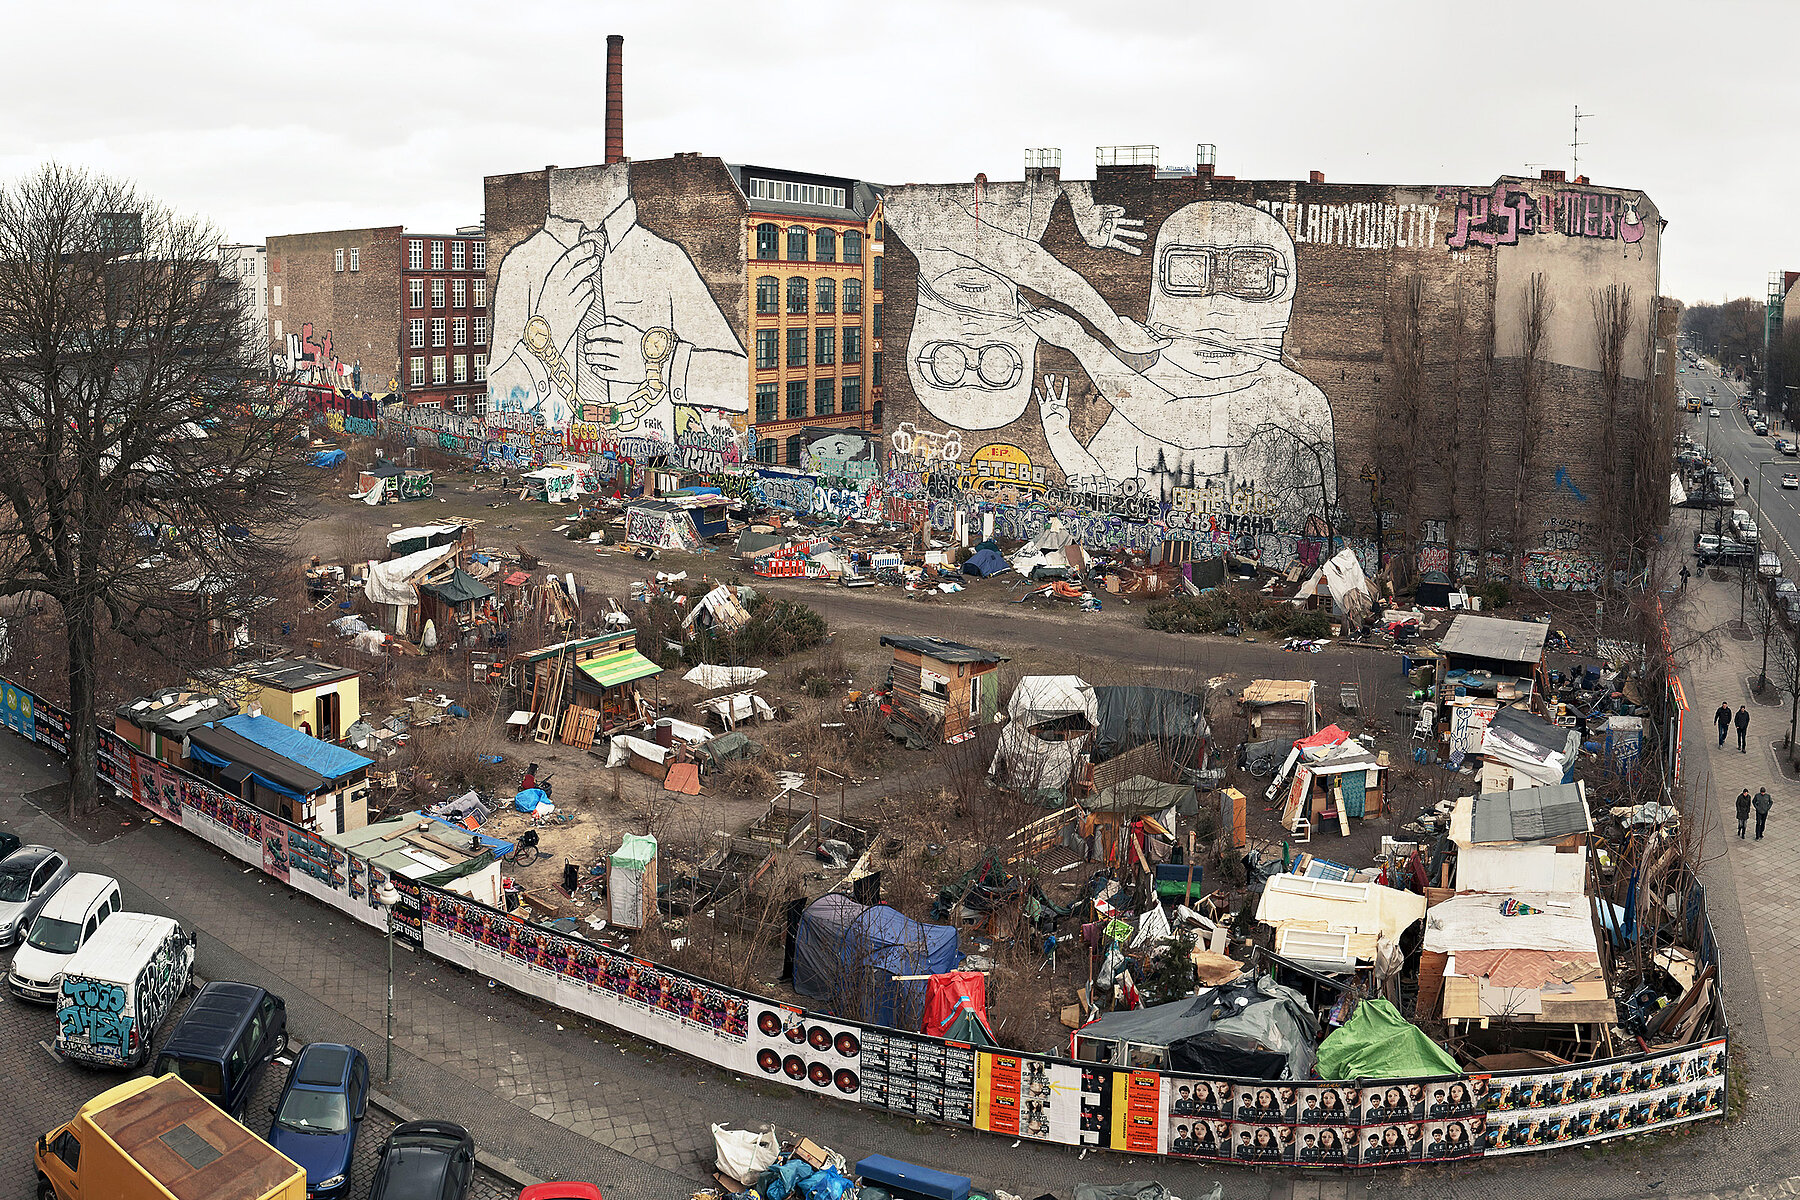 The wasteland on Cuvrystraße from above. A tent city stands on the open space, and on each of the two house walls in the background is a mural with white figures.